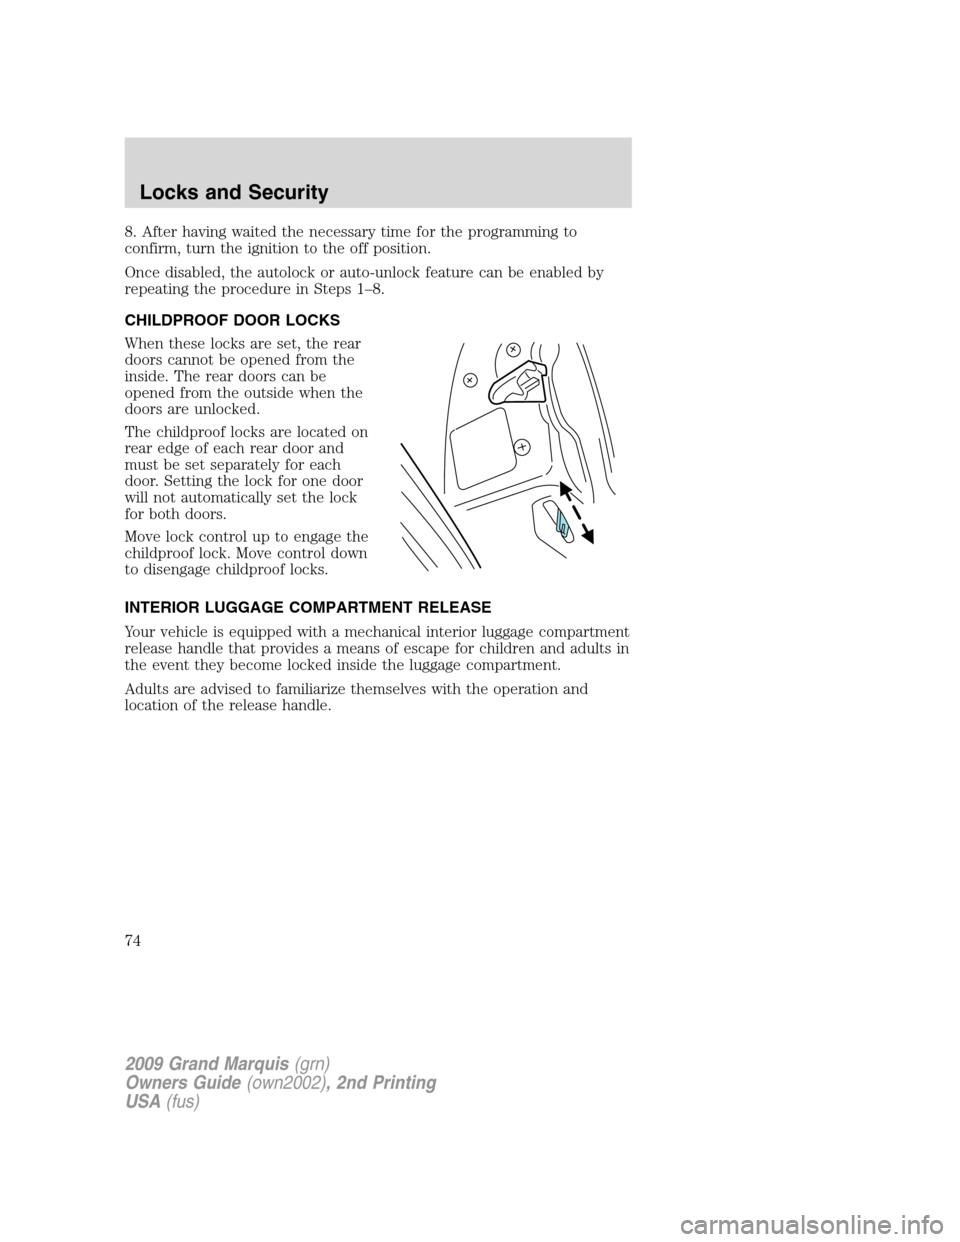 Mercury Grand Marquis 2009  s Manual PDF 8. After having waited the necessary time for the programming to
confirm, turn the ignition to the off position.
Once disabled, the autolock or auto-unlock feature can be enabled by
repeating the proc